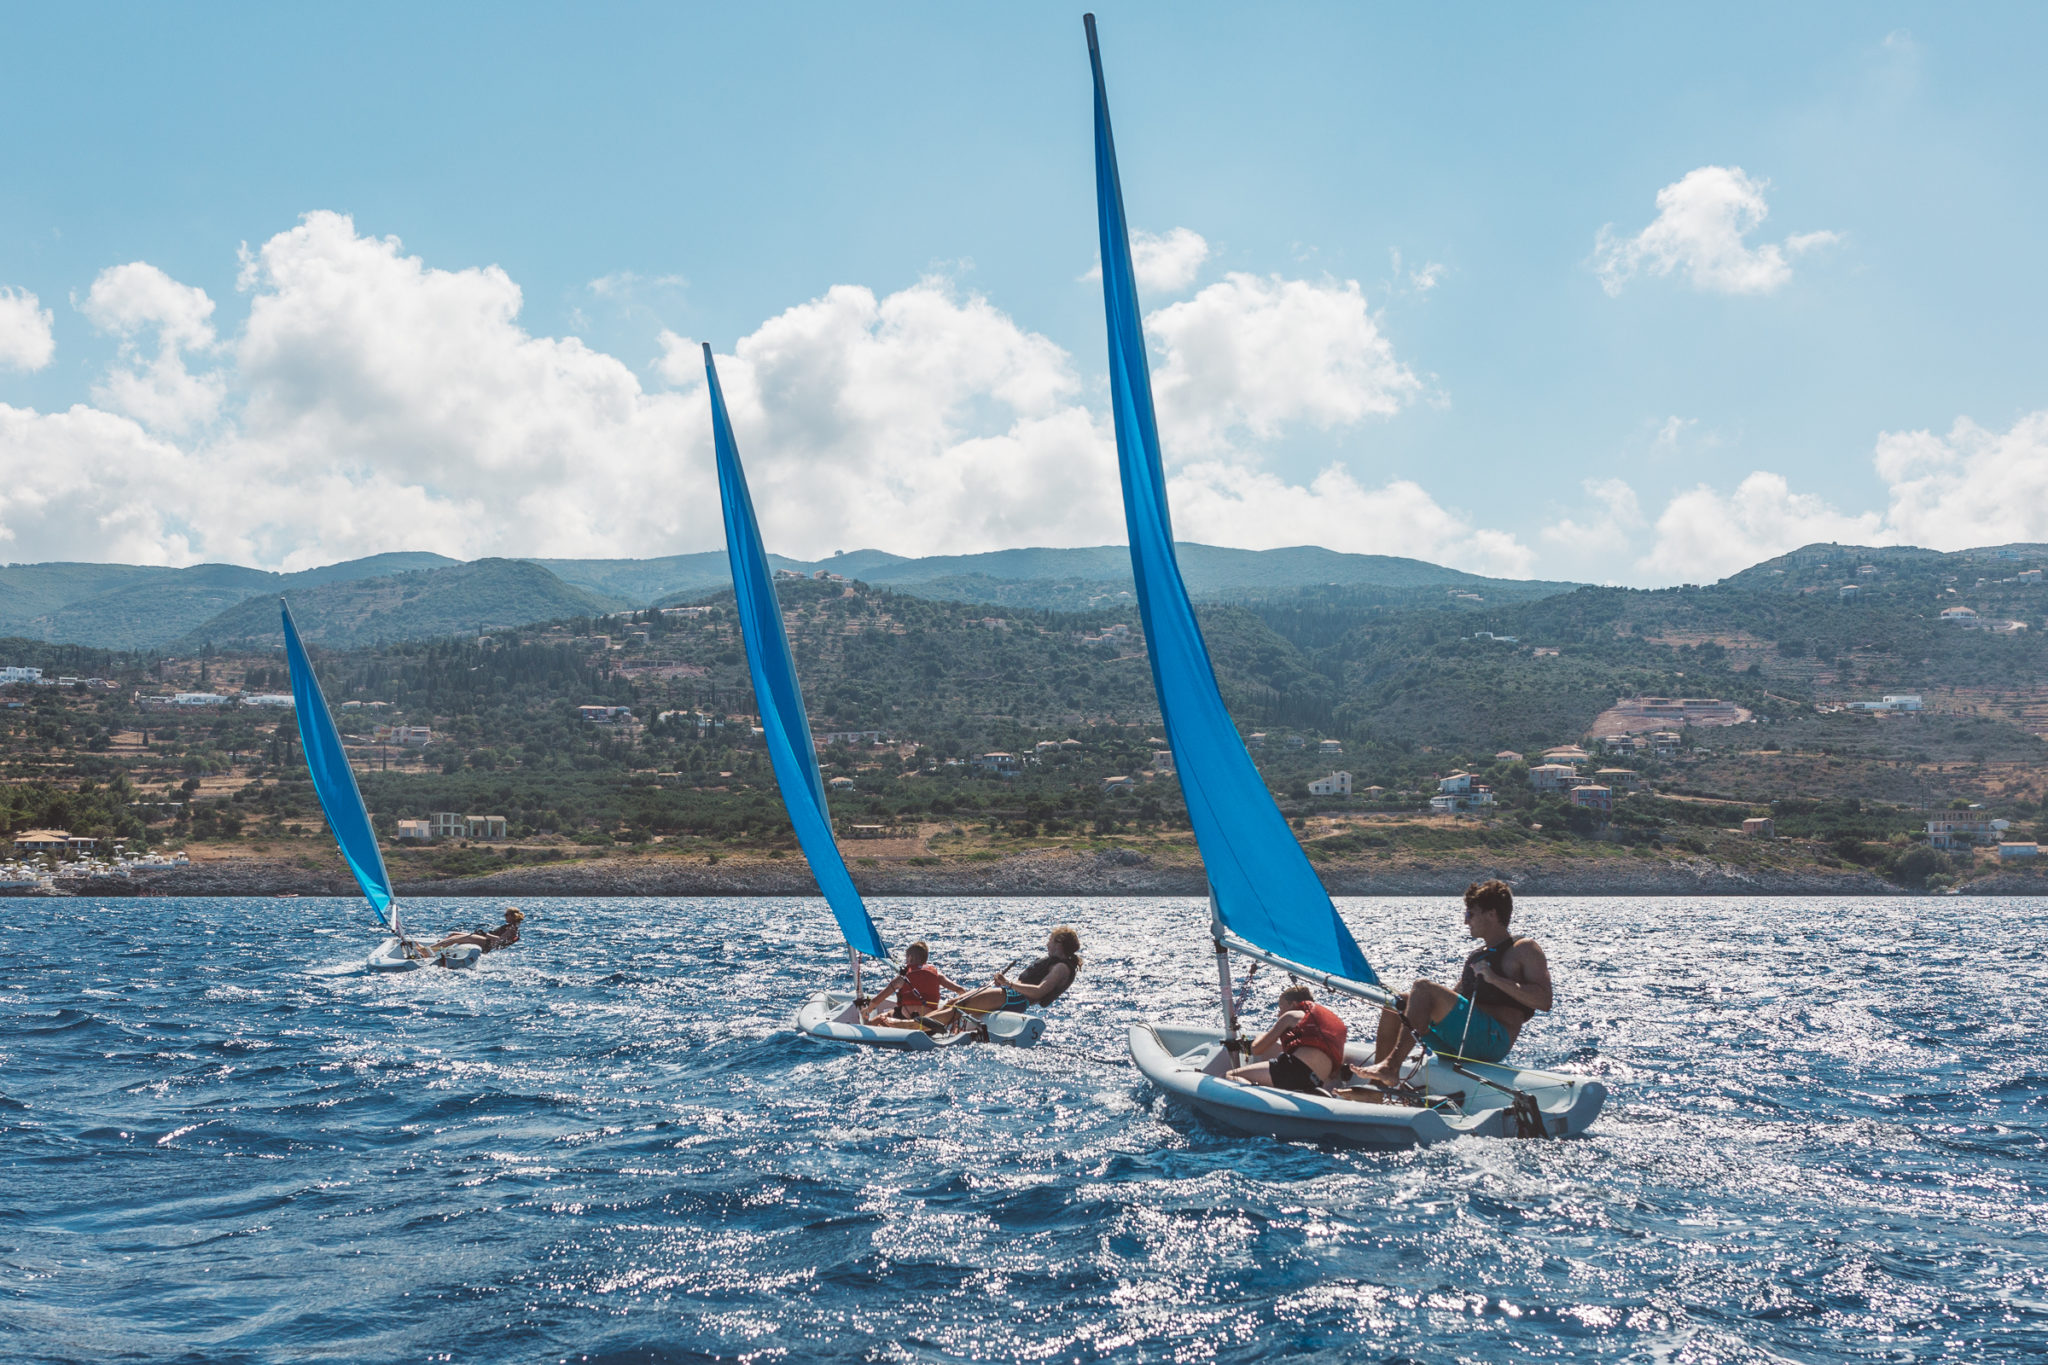 Group of young kids learning to sail